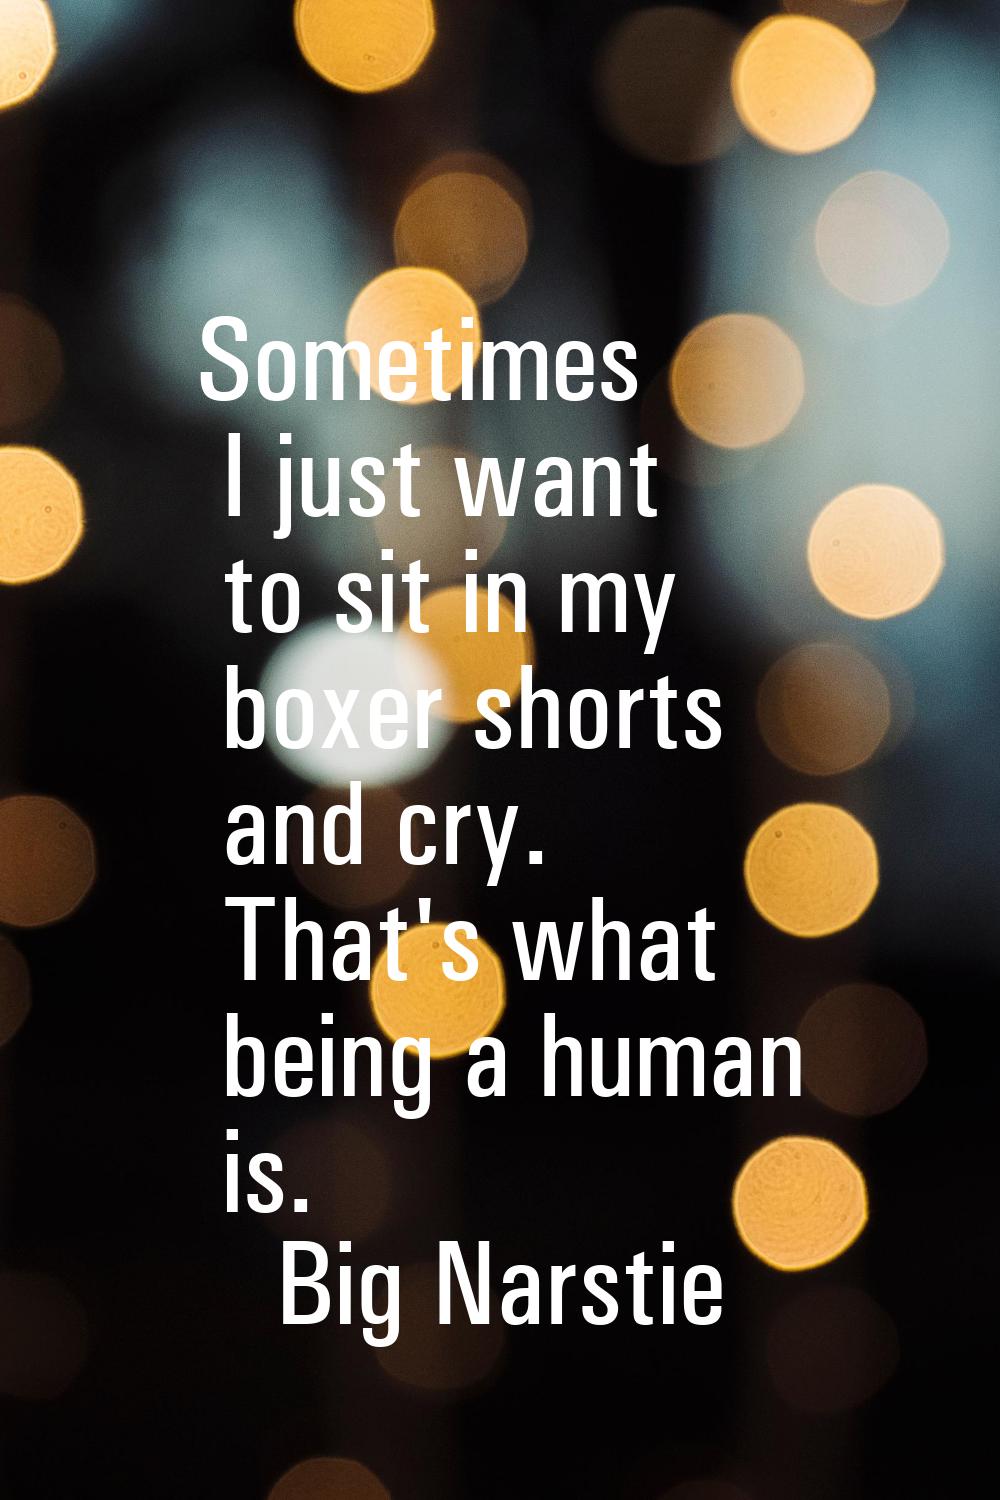 Sometimes I just want to sit in my boxer shorts and cry. That's what being a human is.